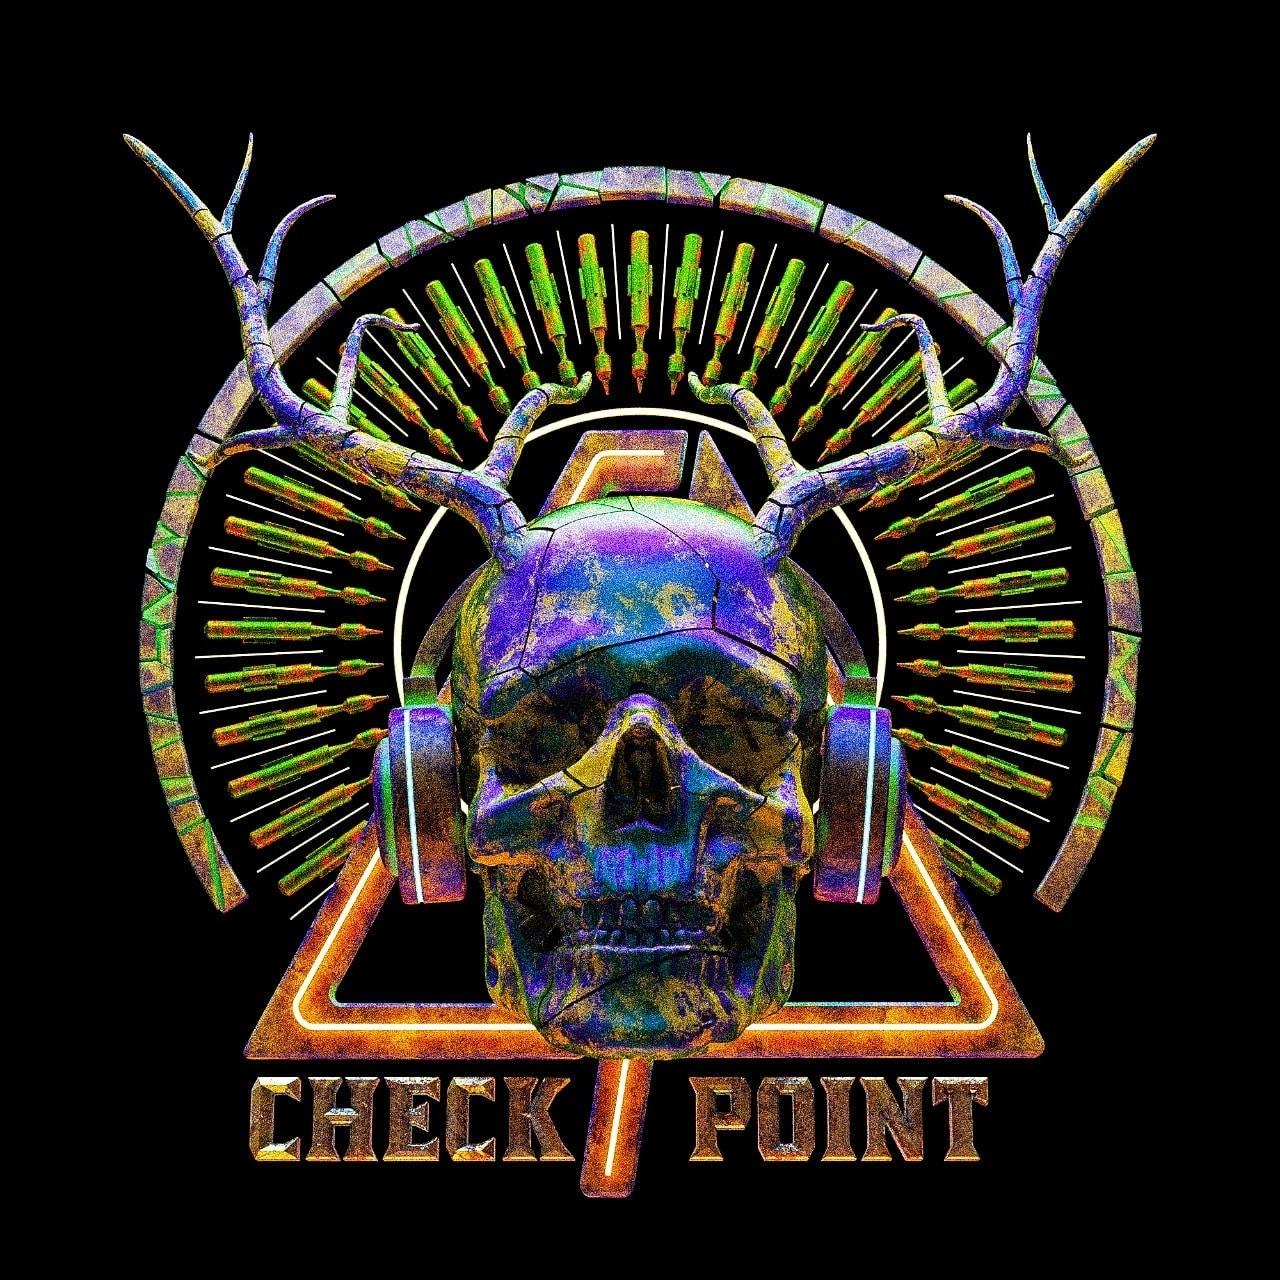 Check Point Band